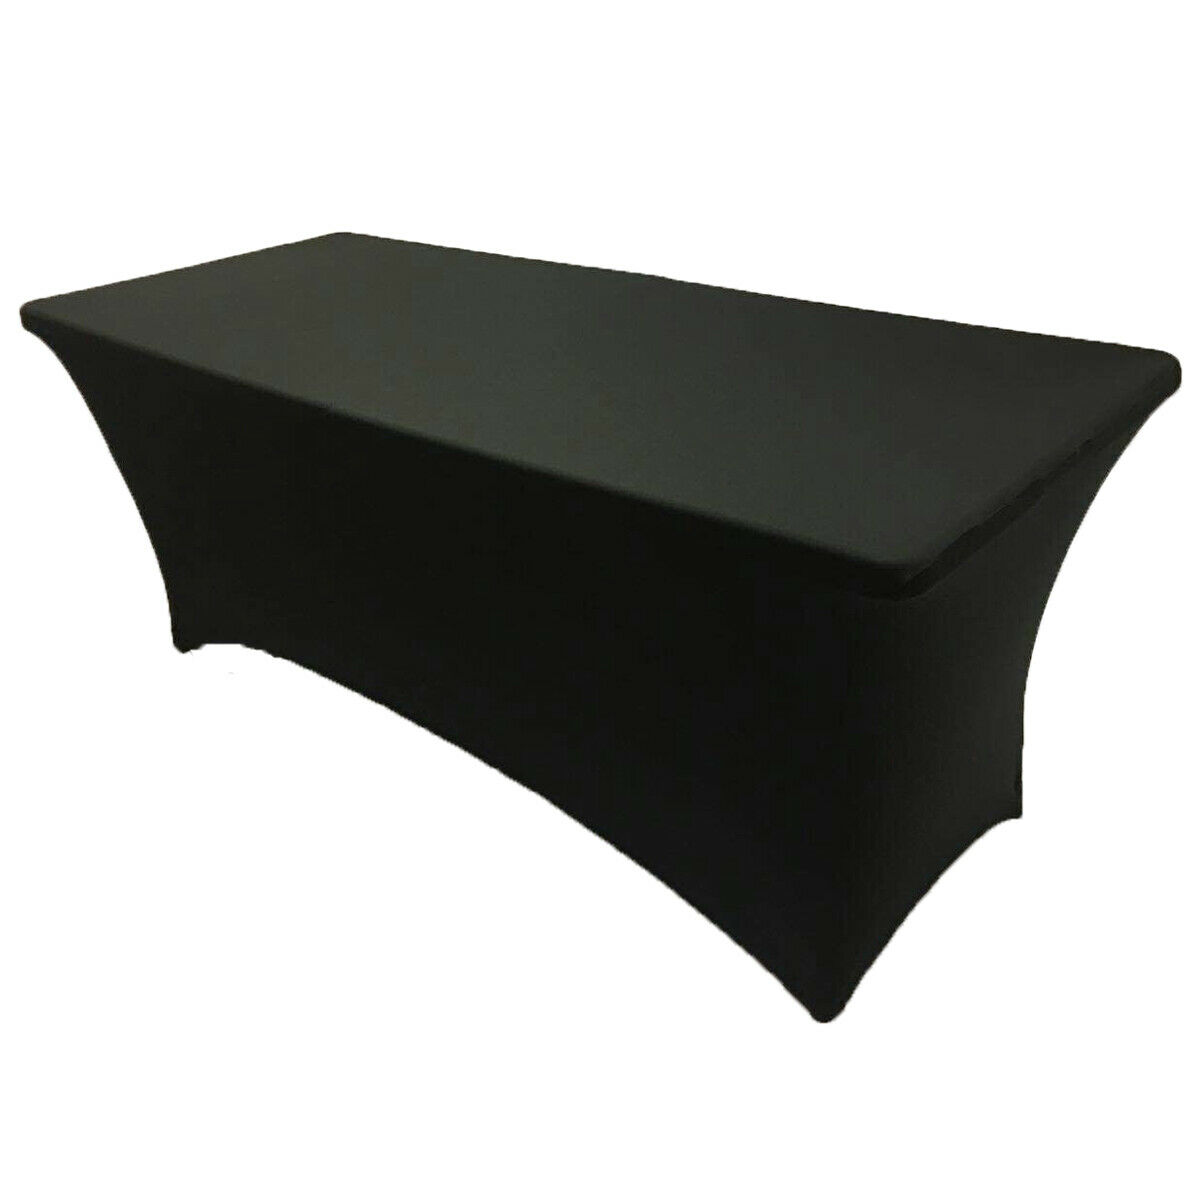 6' Ft. Spandex Fitted Stretch Tablecloth Table Cover Wedding Banquet Party Black